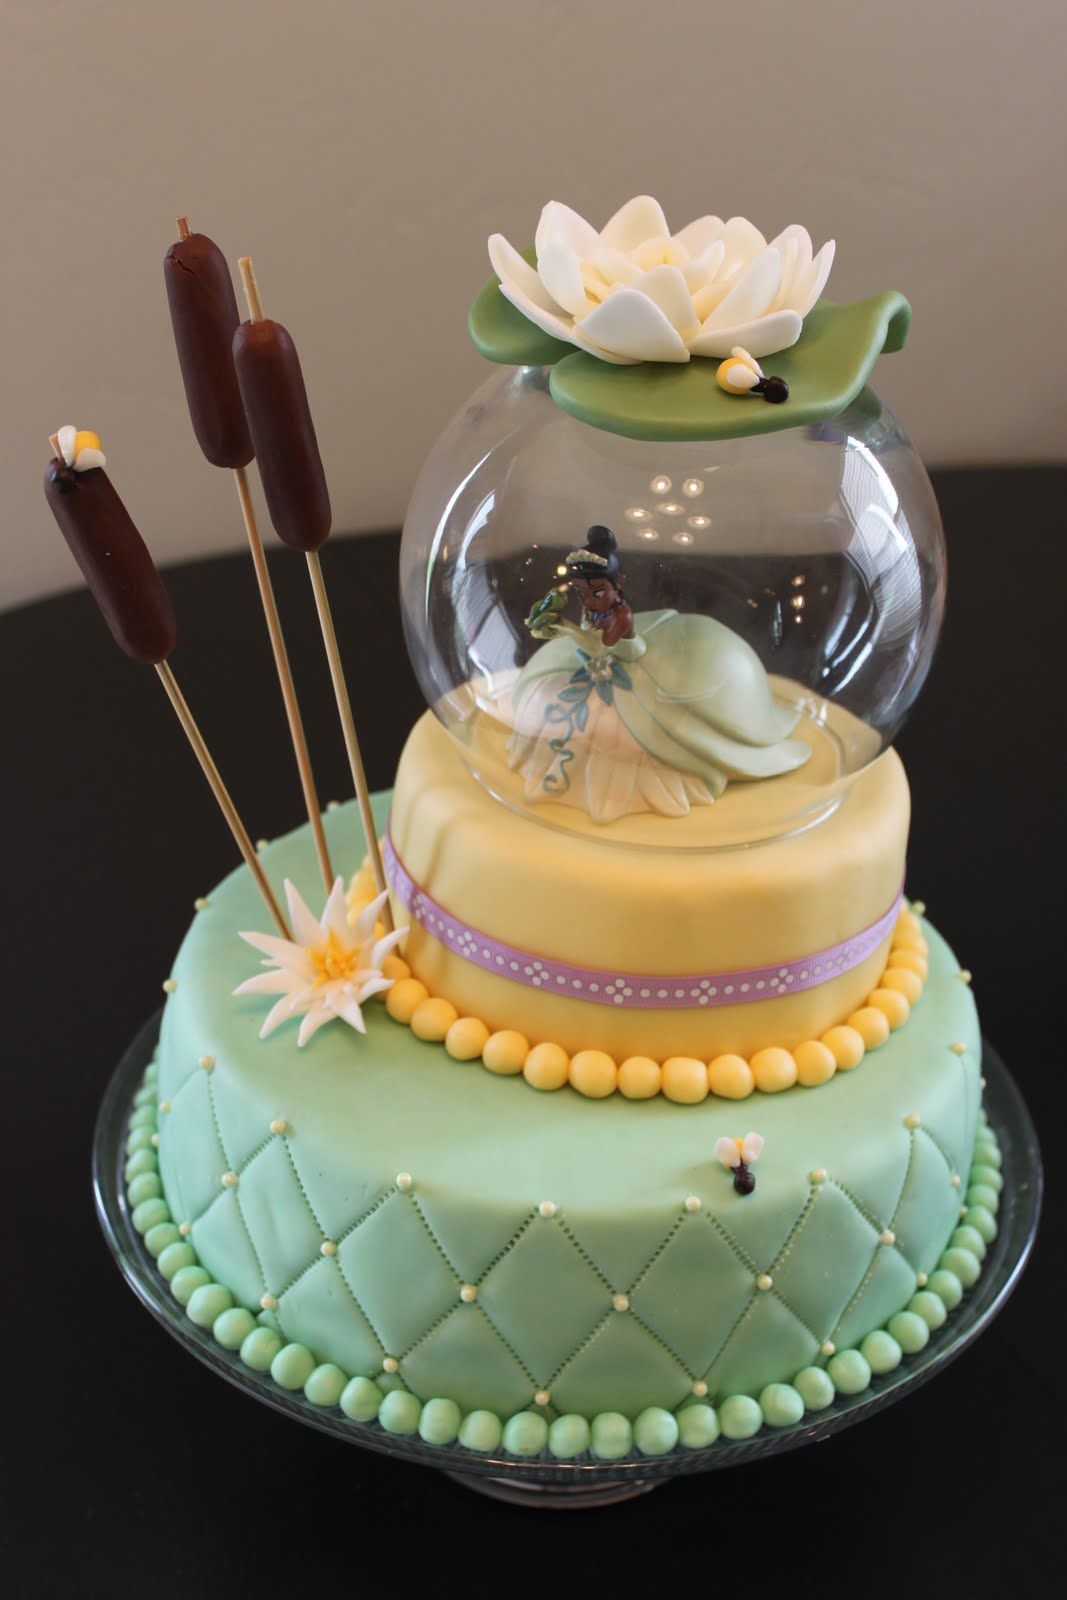 princess cake ideas | … in May and had a Princess and the Frog party. Here is the cake I made